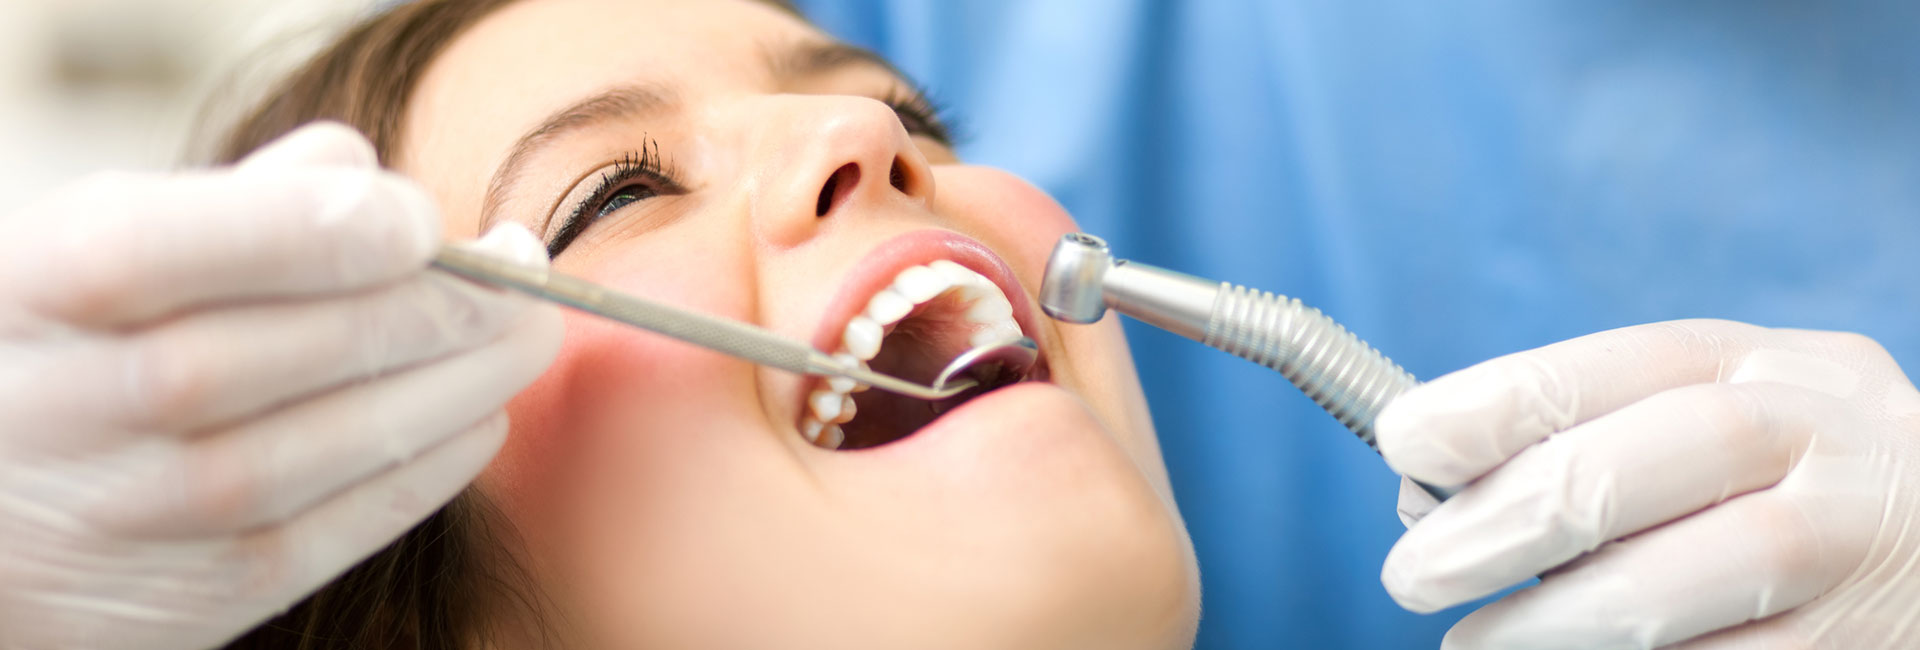 Female patient having dental treatment with Diagnodent